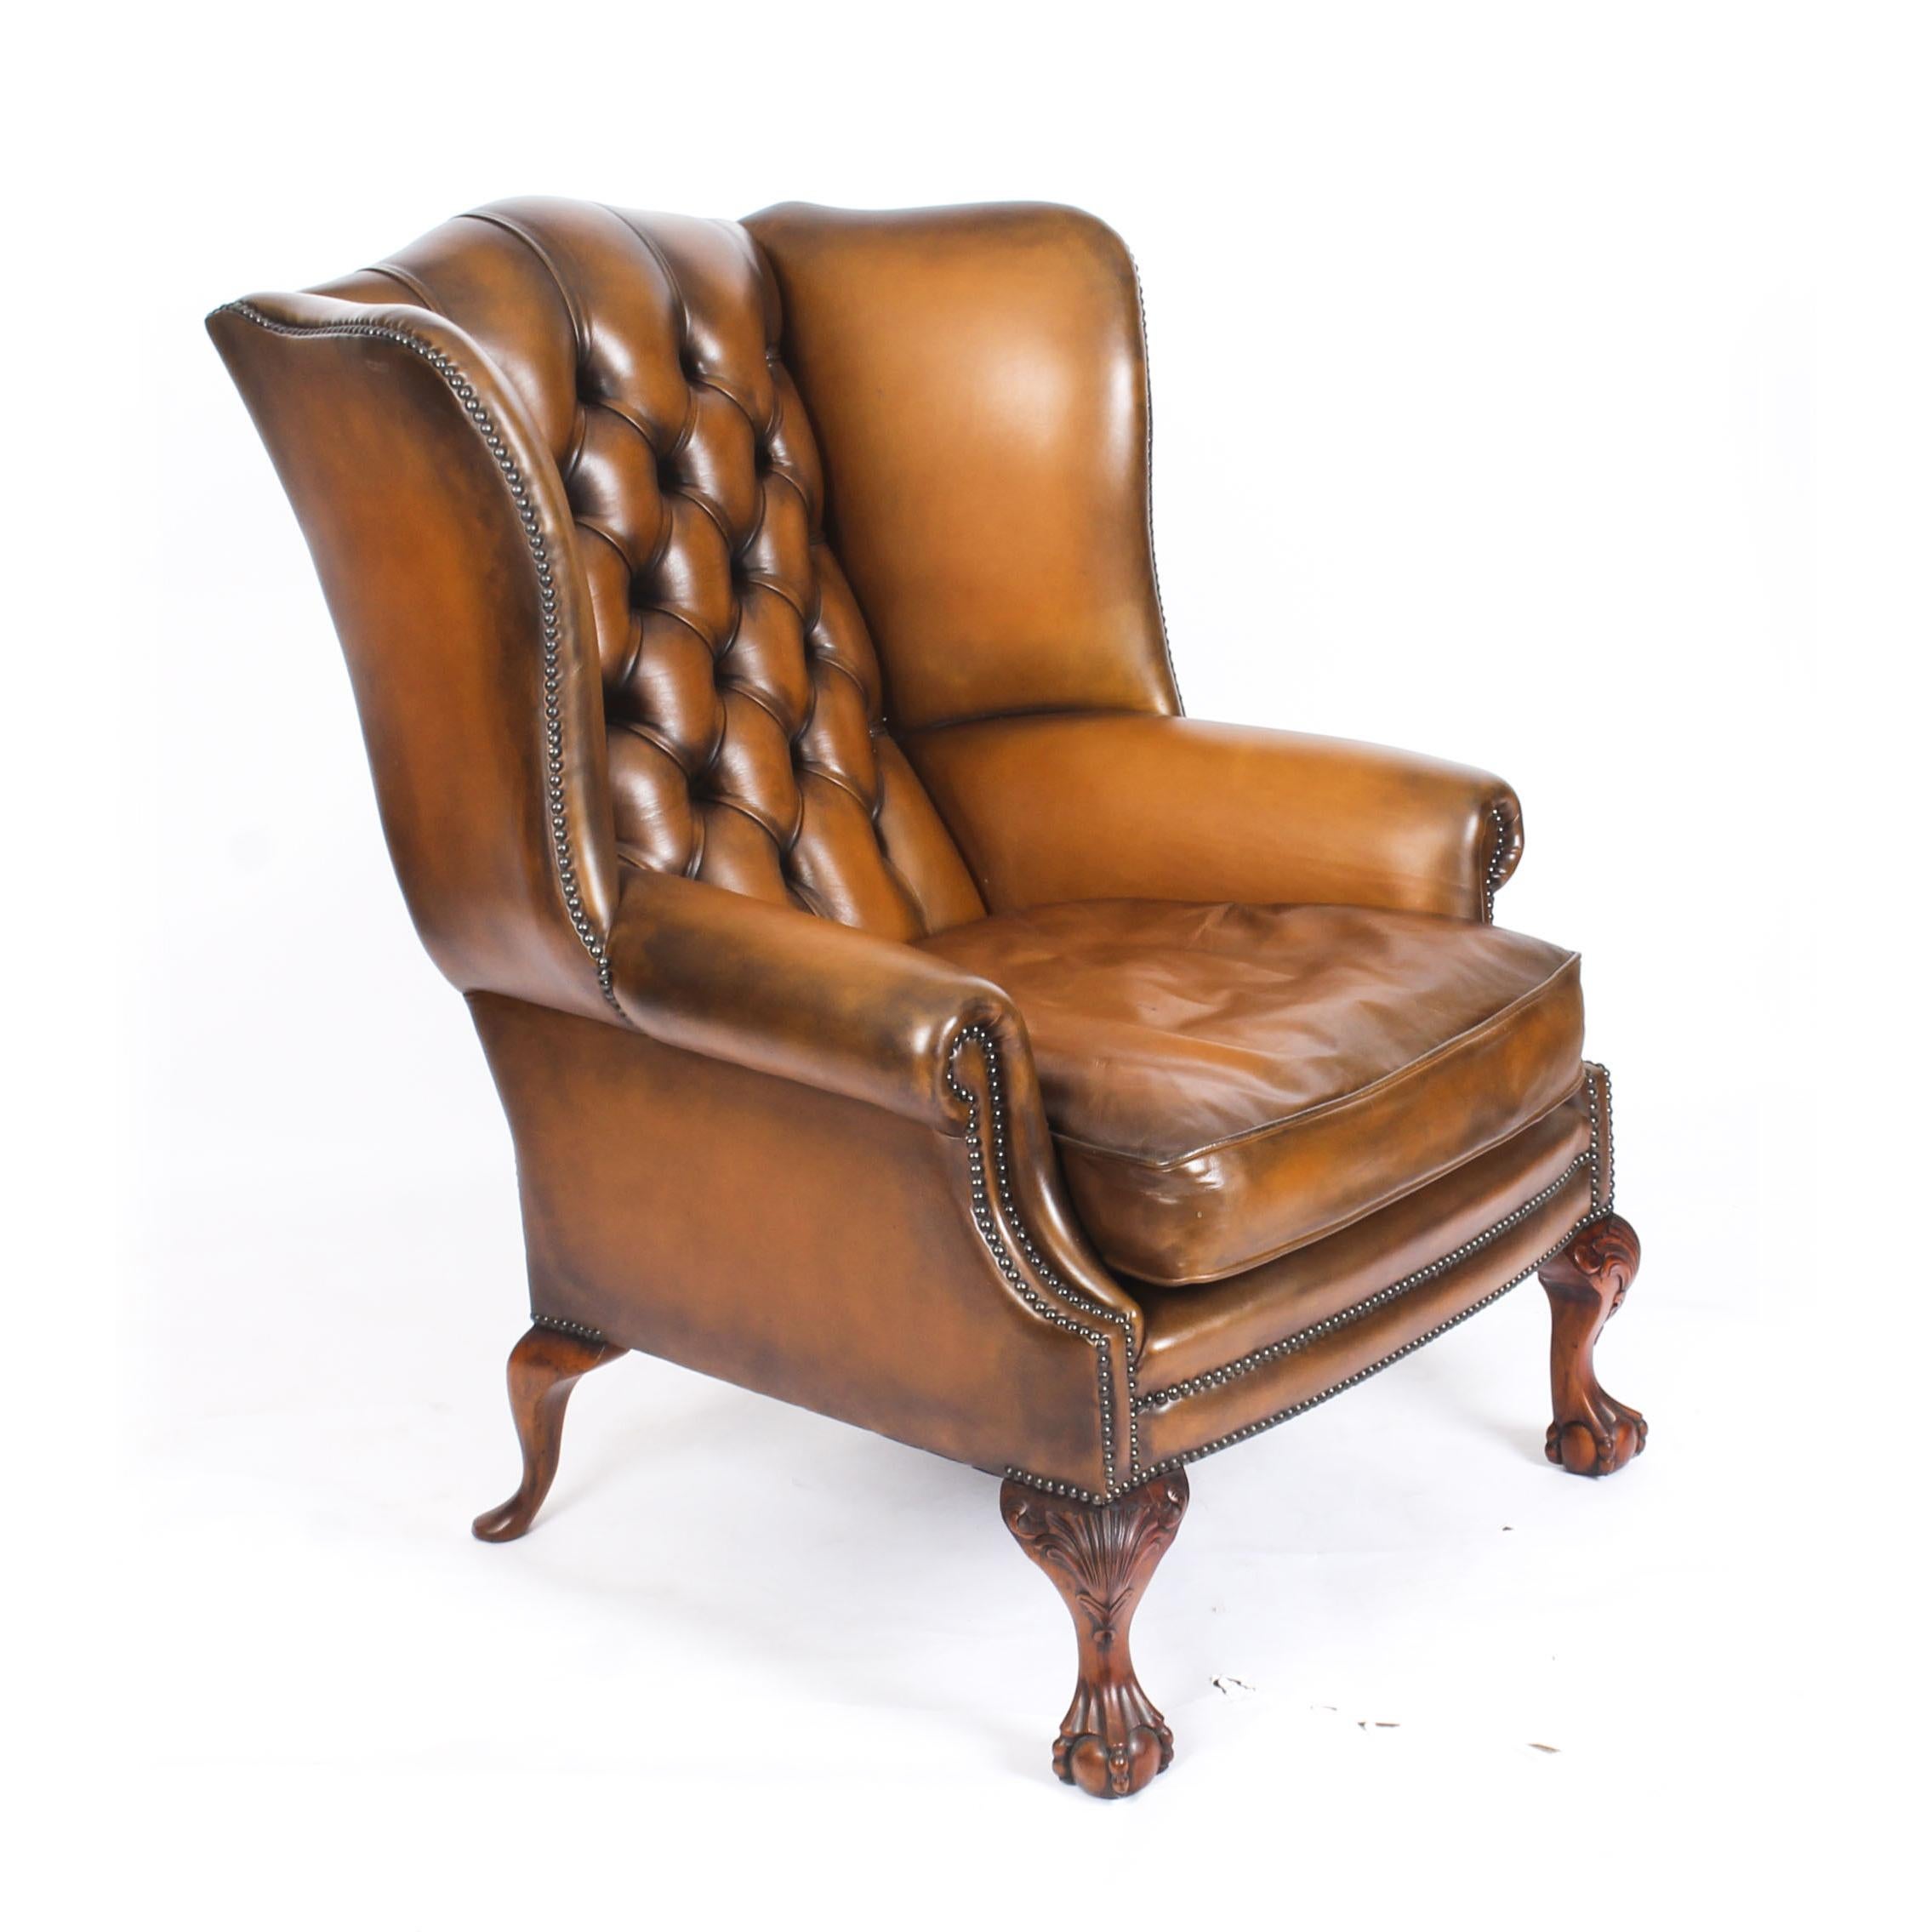 This is an absolutely fabulous pair of antique English leather wingback Chippendale Revival armchairs, circa 1920 in date.

They stand on hand carved solid mahogany ball and claw cabriole legs with acanthus decoration.

The leather is of superb